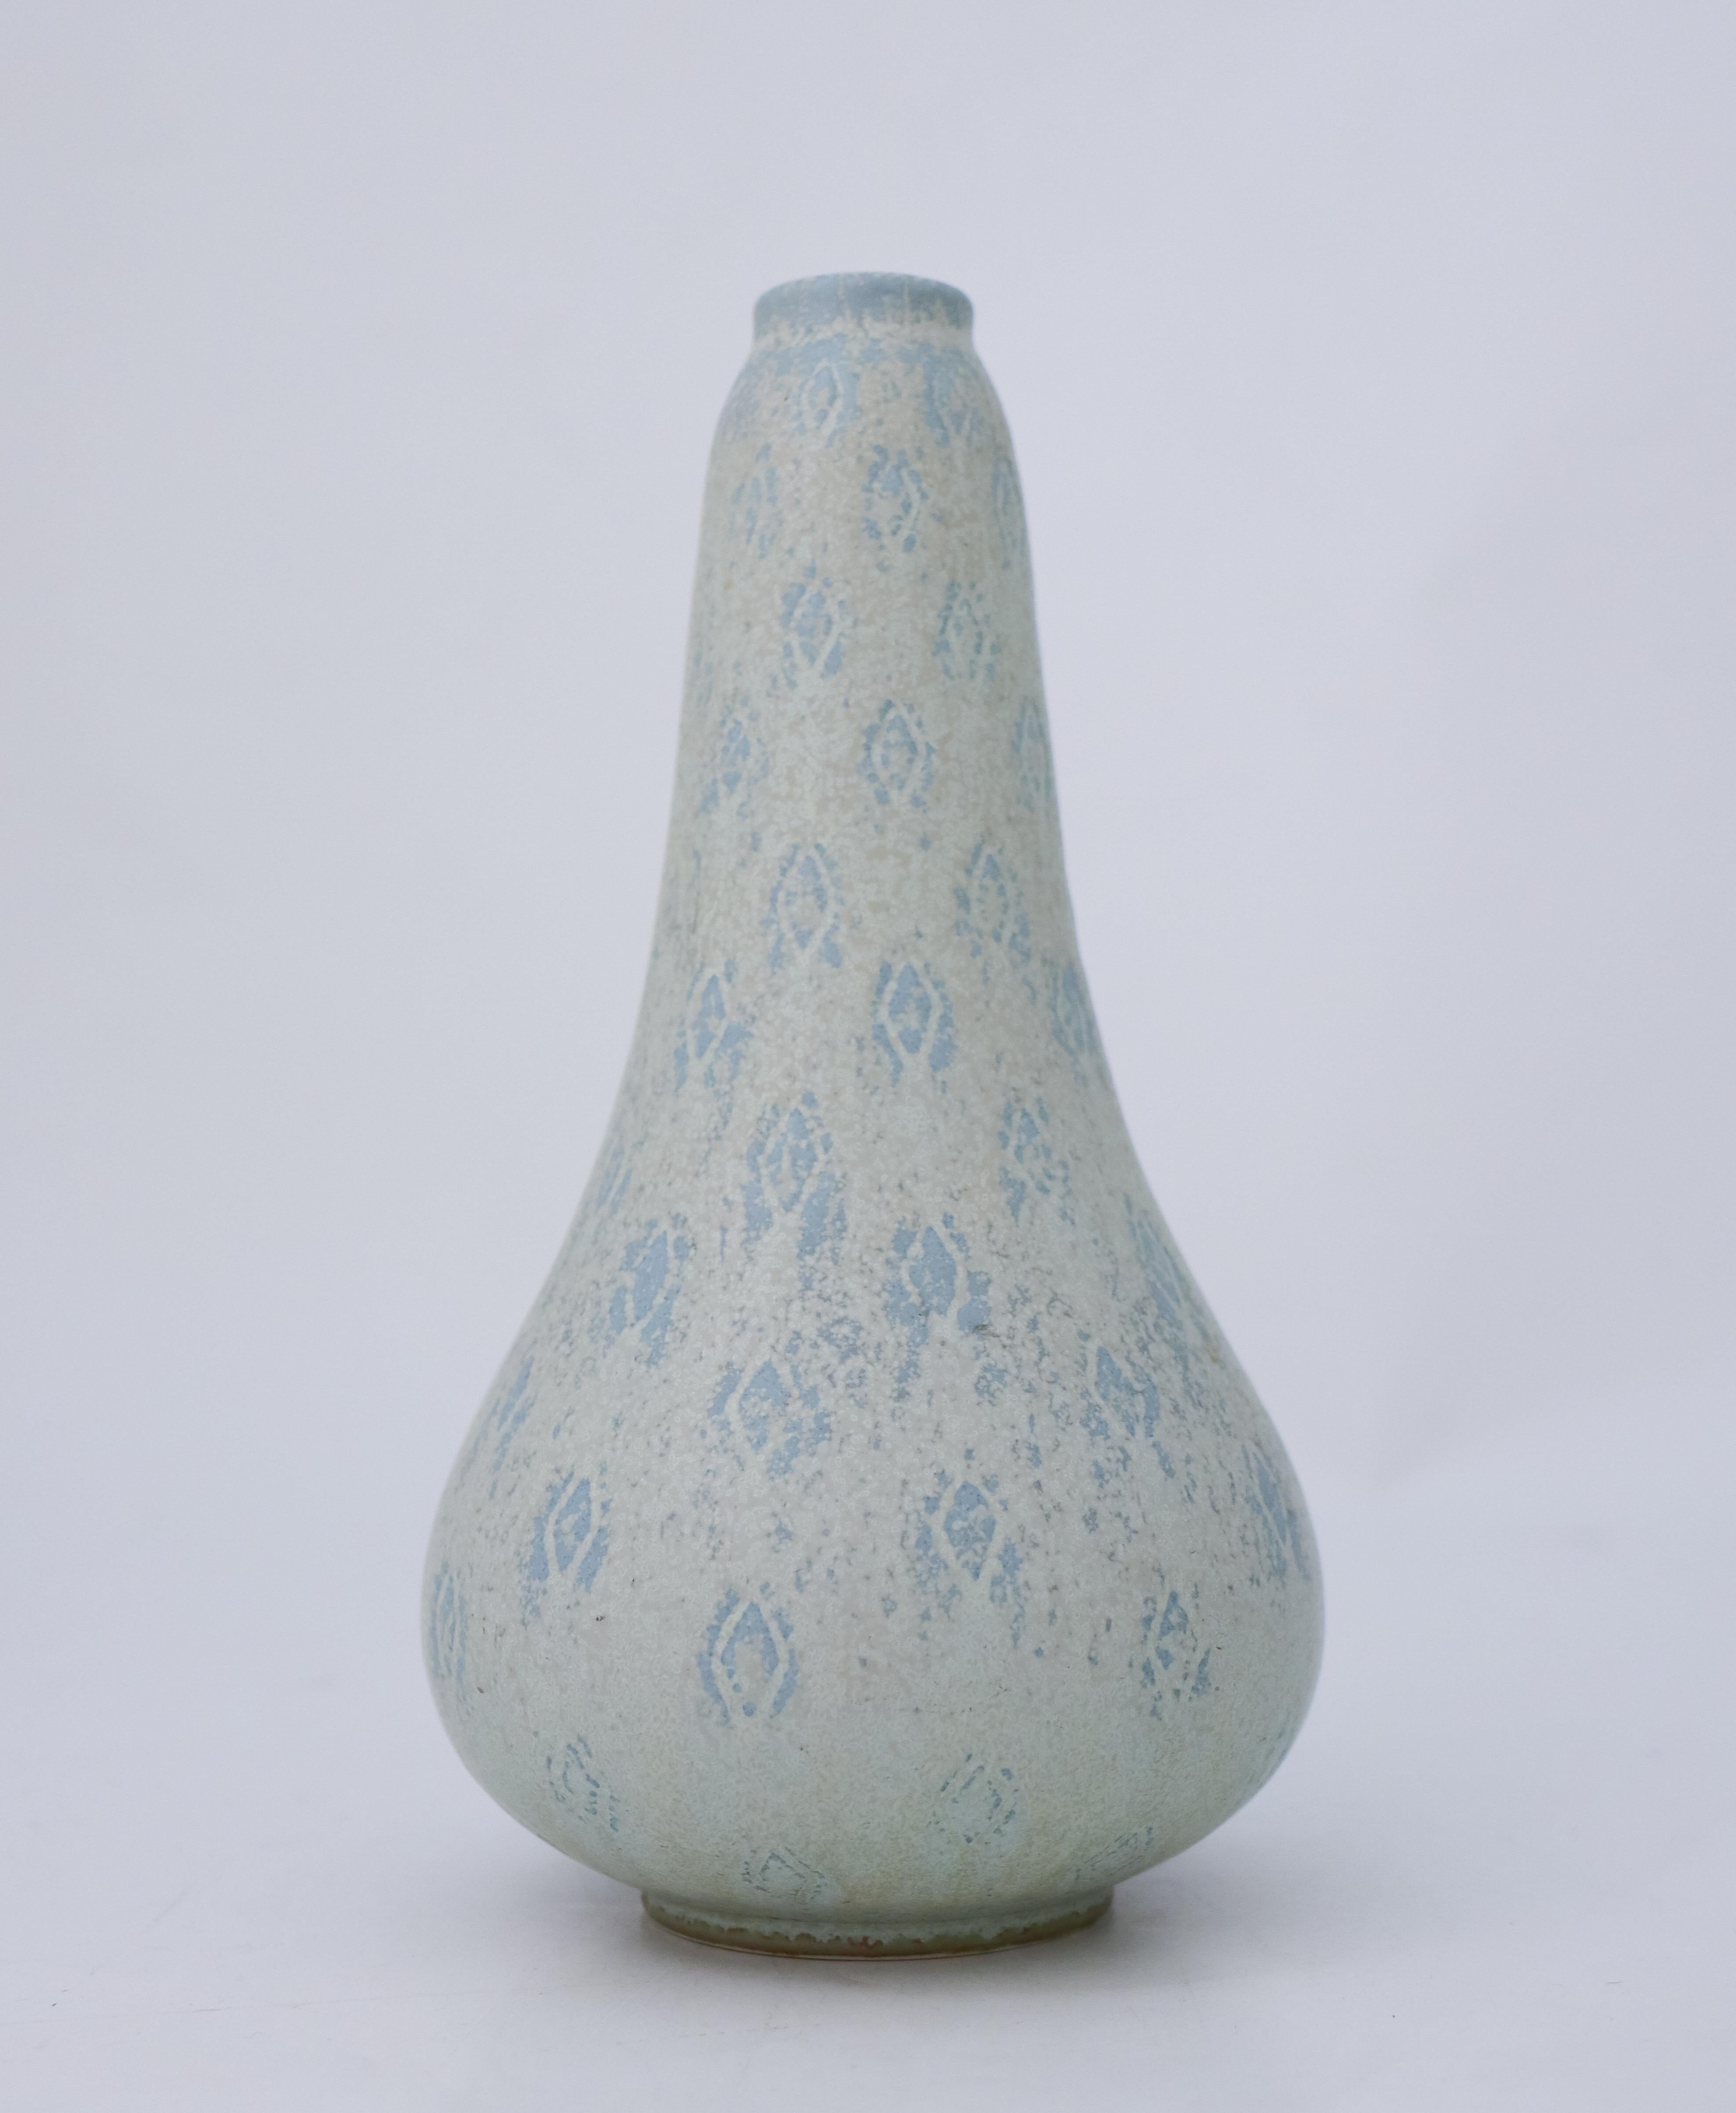 A gray and blue vase designed by Gunnar Nylund at Rörstrand, the vase is 20 cm (8